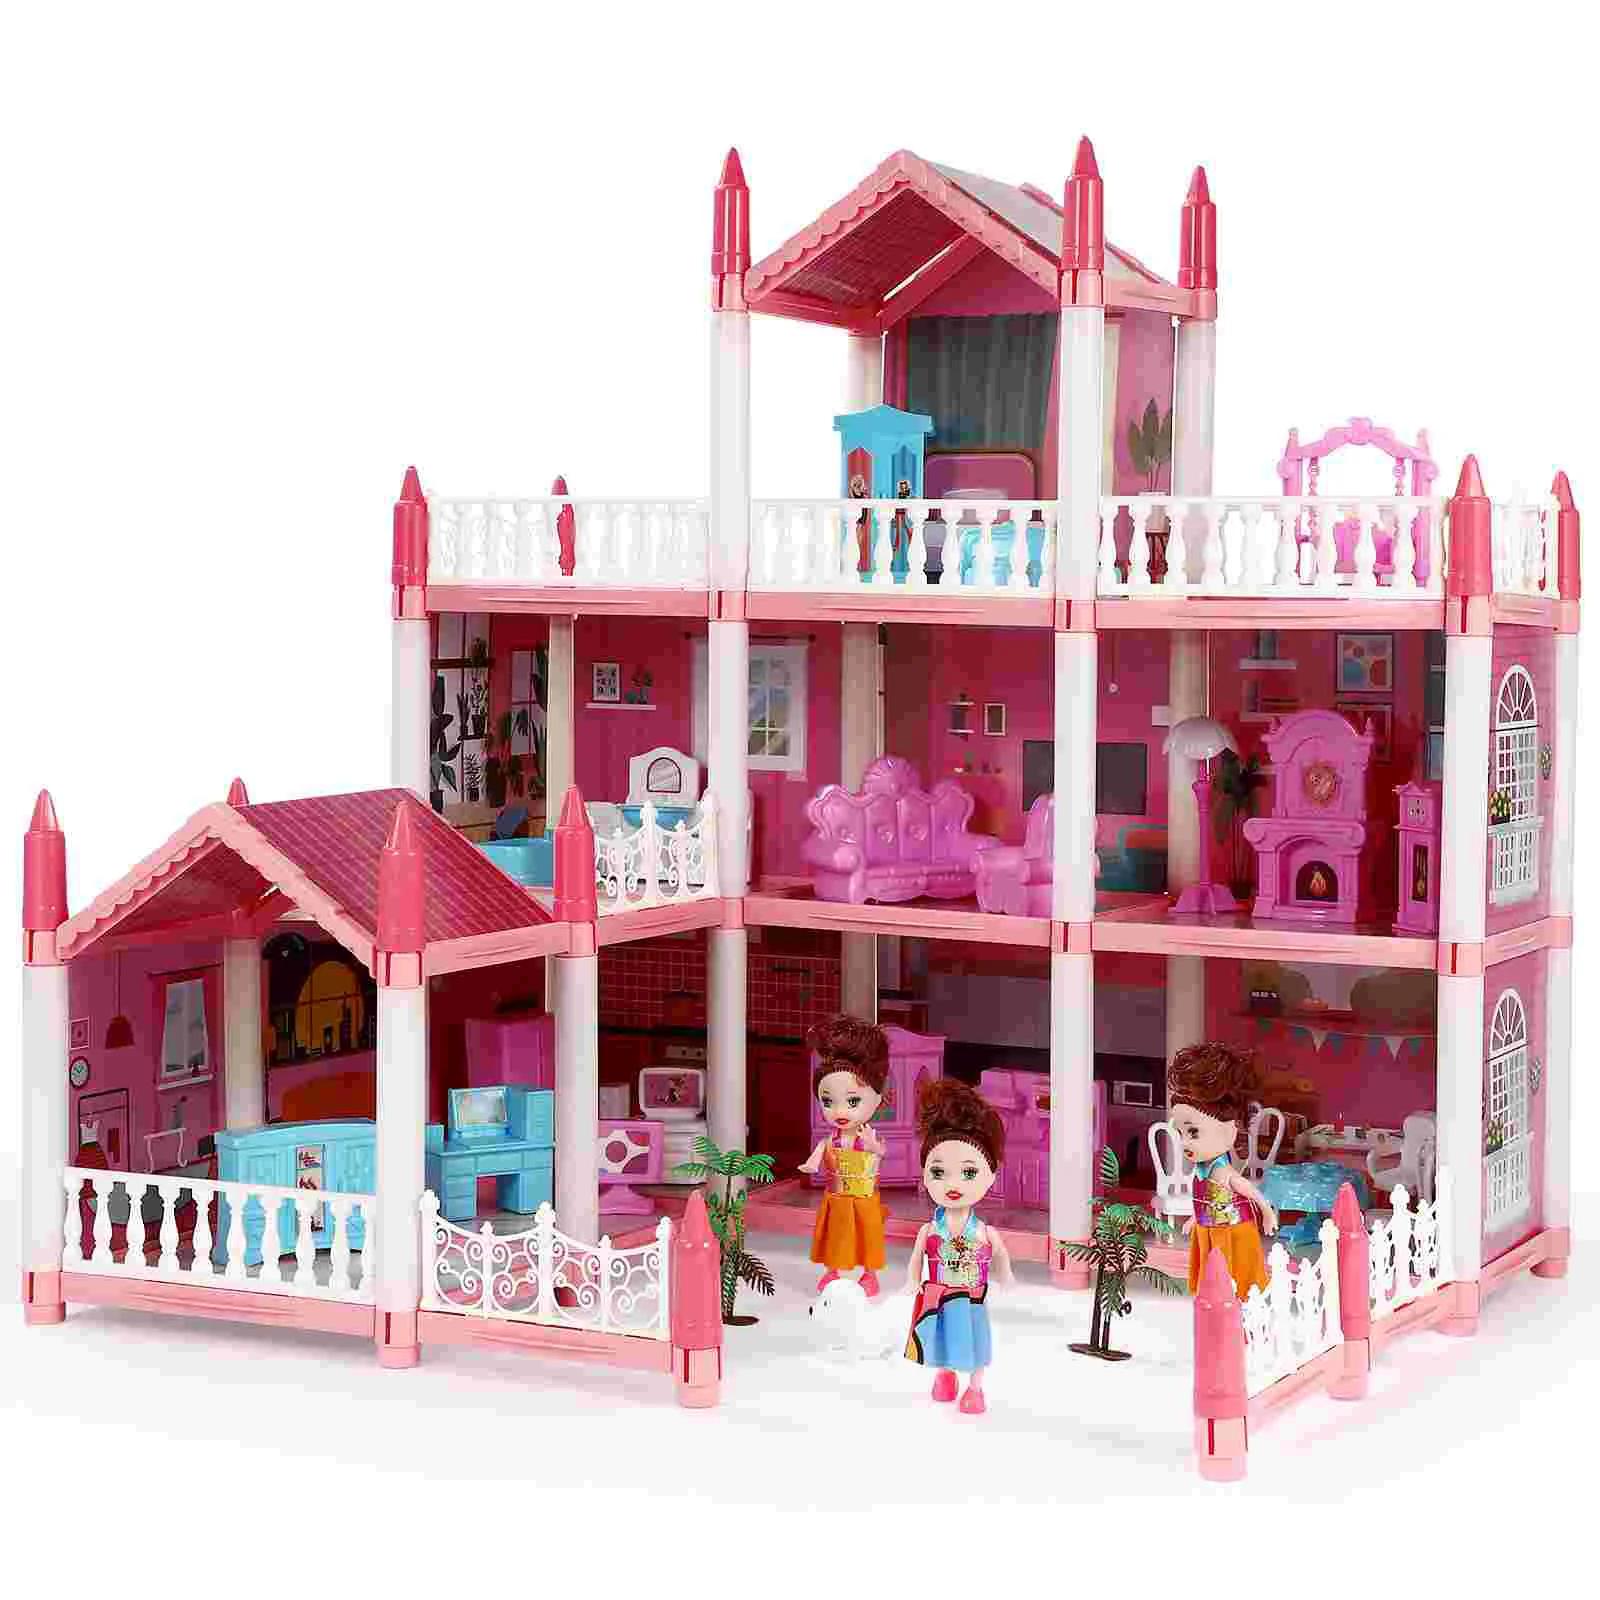 

House With Furniture Accessories Toys Princess Toddler Playhouse Girl Pp For Girls Little 3 Stories Child Doll's Dollhouse